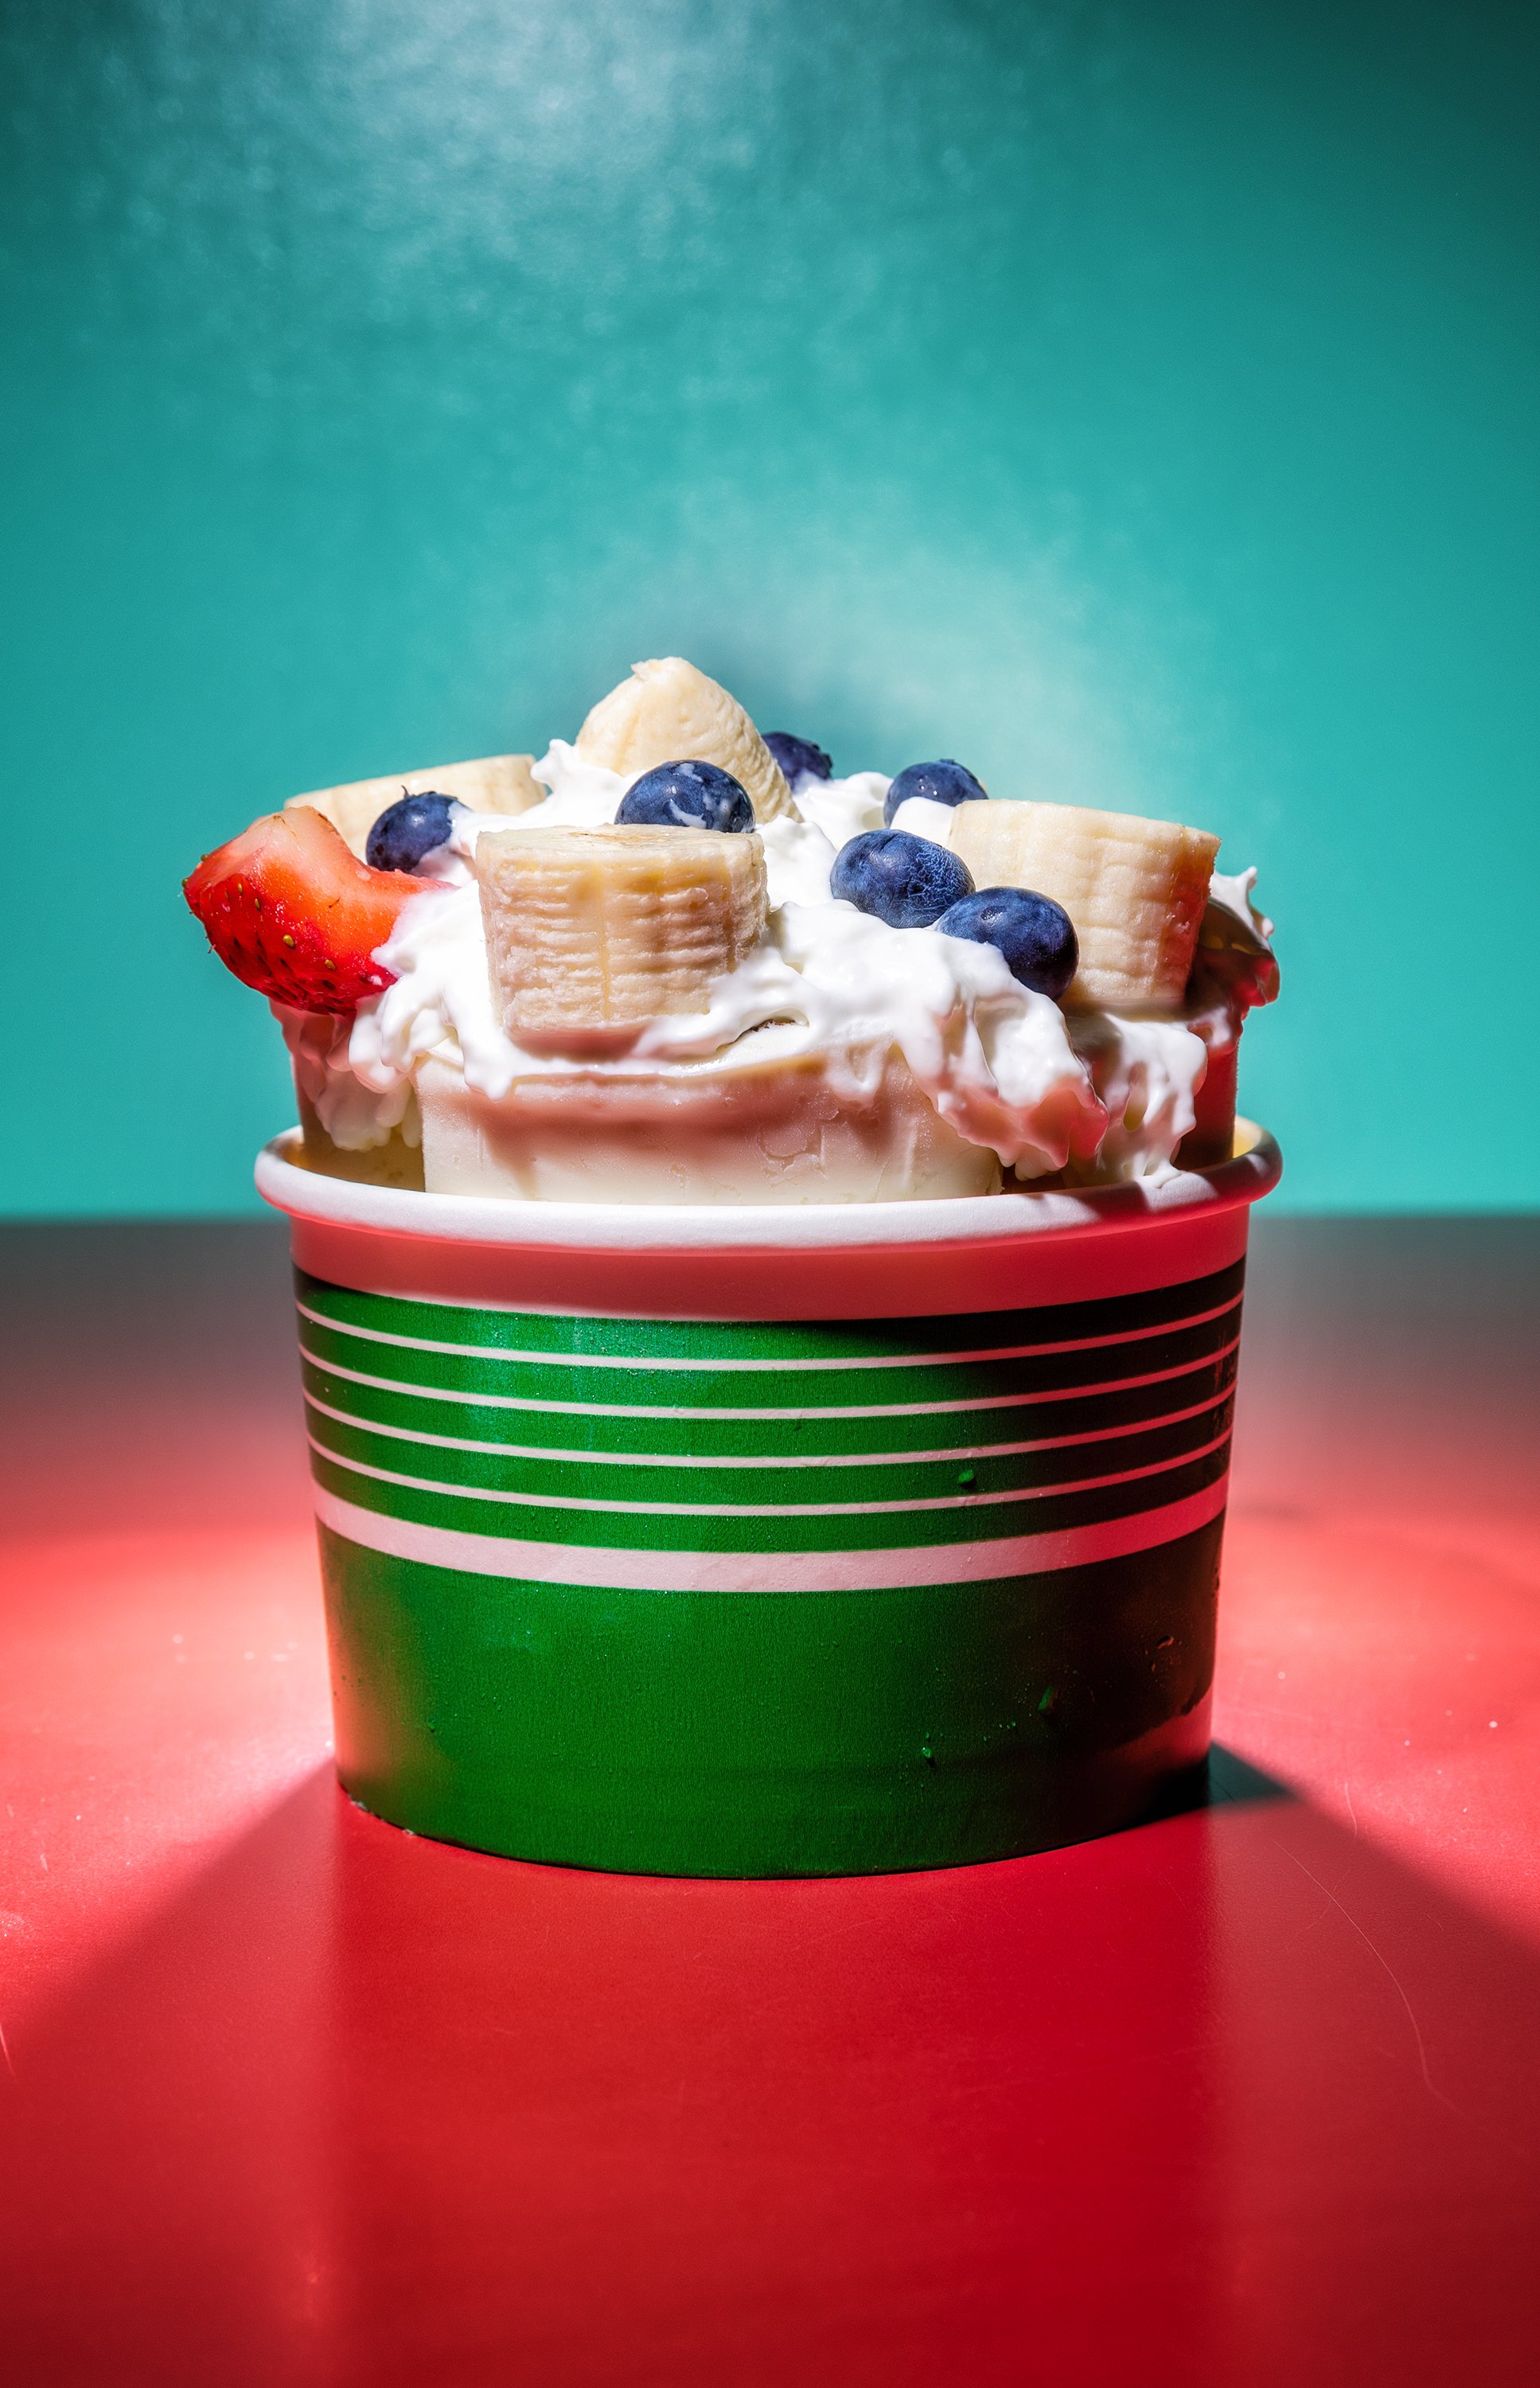 Big Monkey is a banana base ice cream with nutella, caramel sauce, whipped cream and fresh berries.